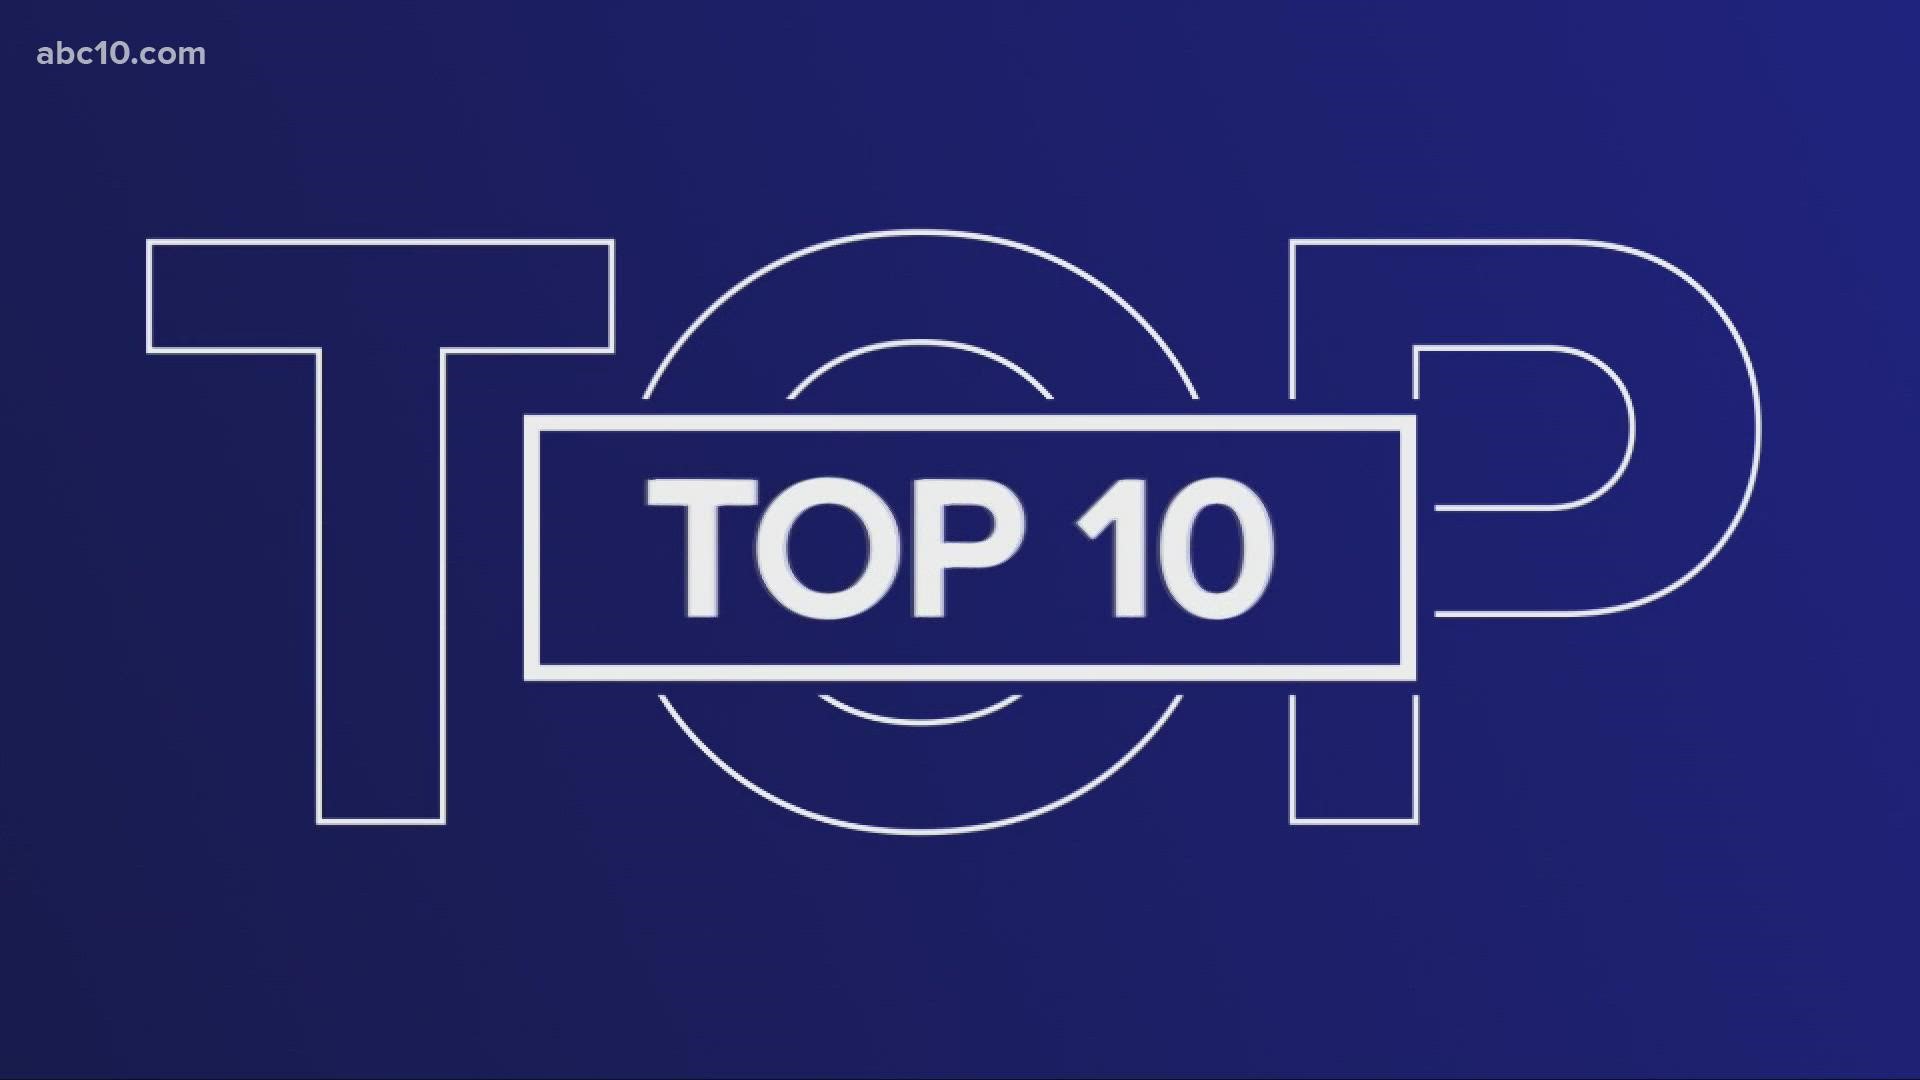 ABC10 covers details of the top 10 stories just within 2 minutes.